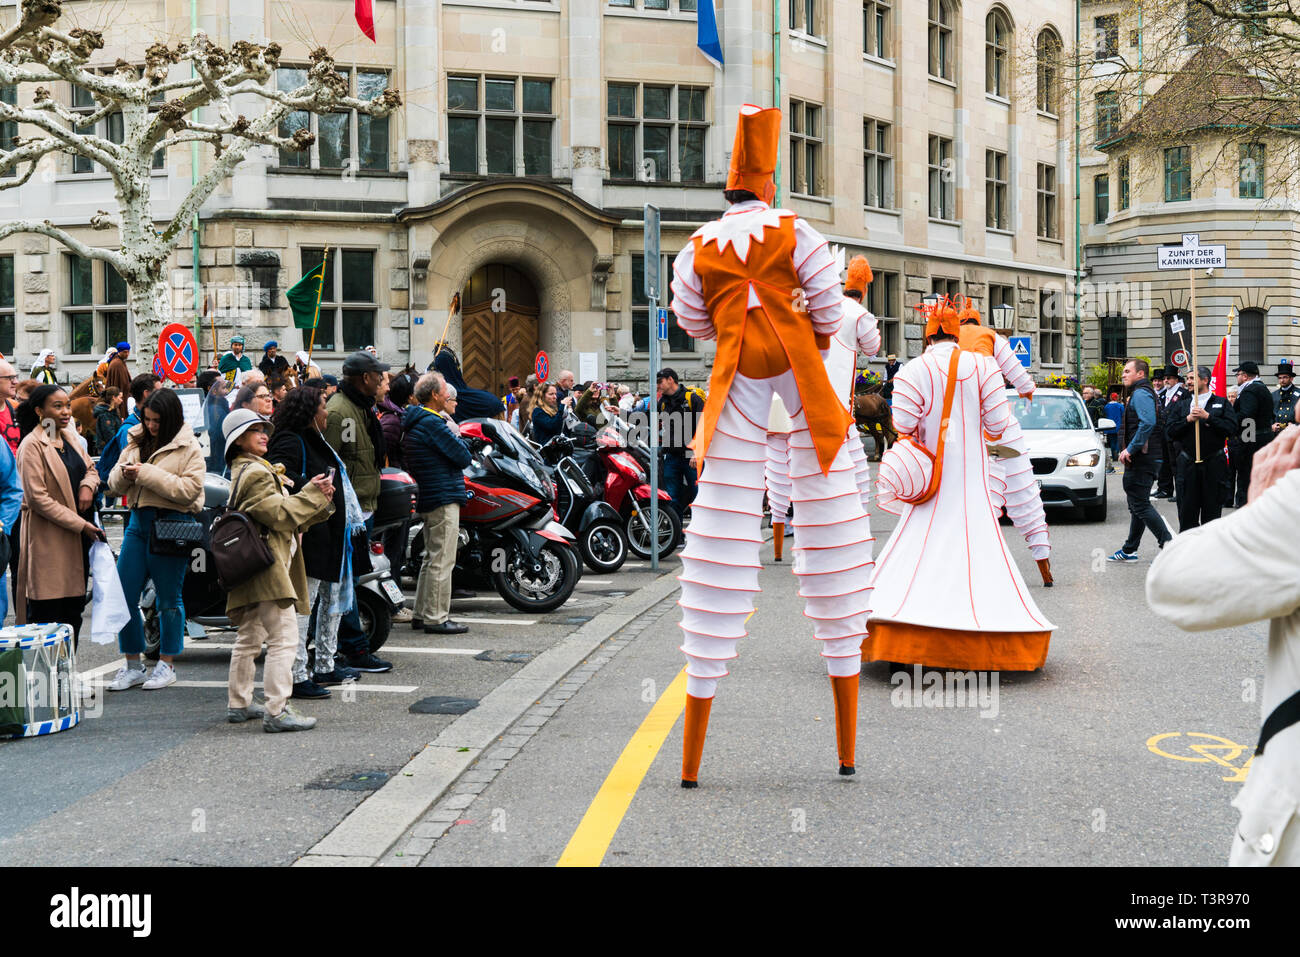 Zurich, ZH / Switzerland - April 8, 2019: the traditional spring ...